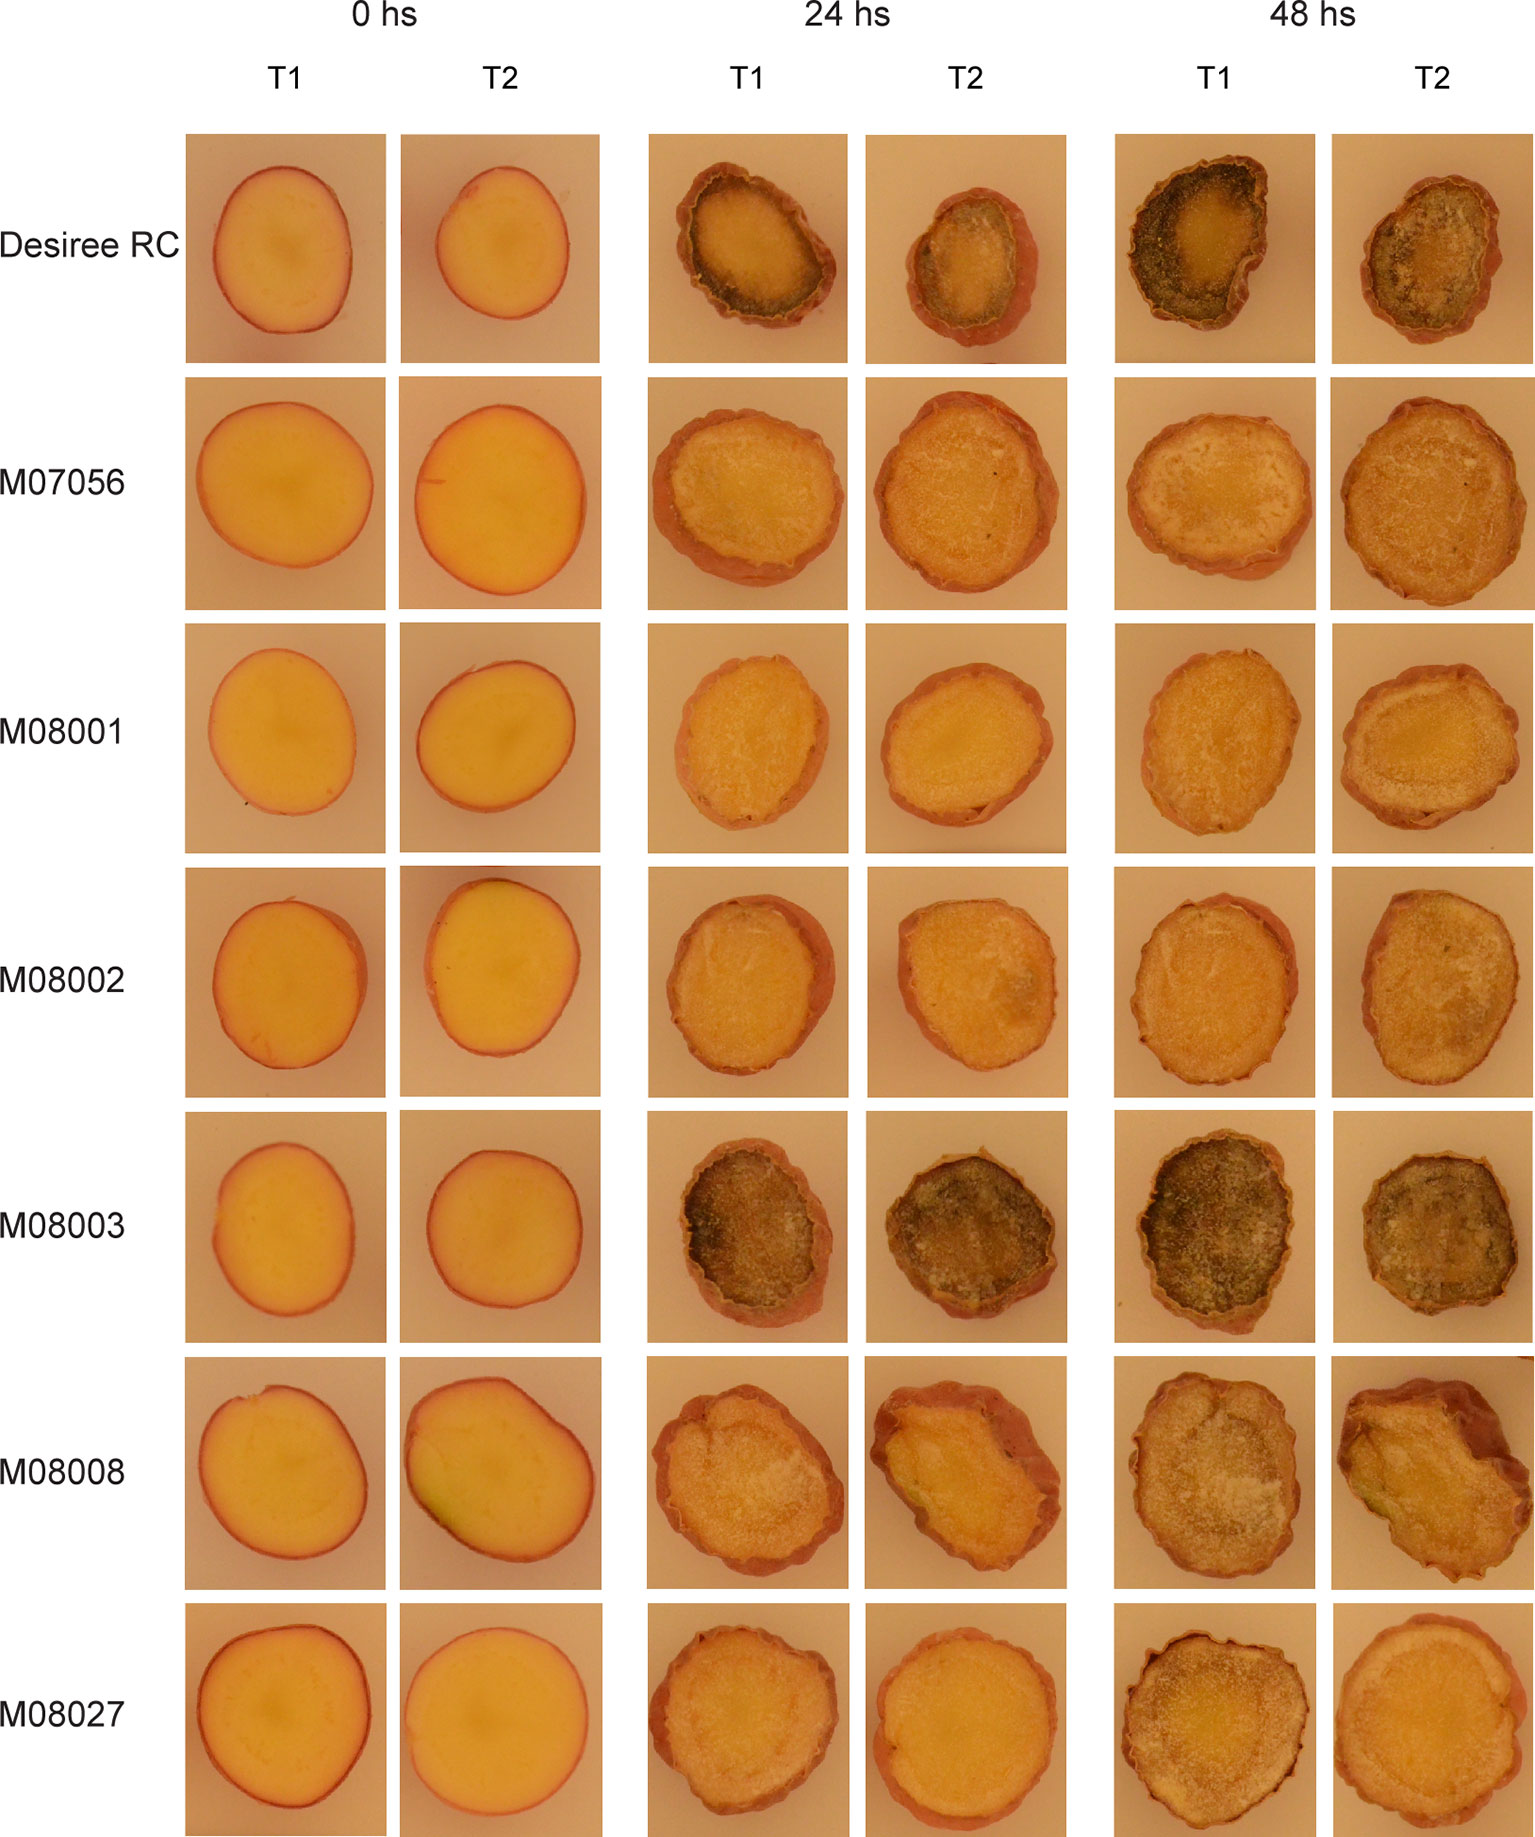 Frontiers | Reduced Enzymatic Browning in Potato Tubers by Specific ...